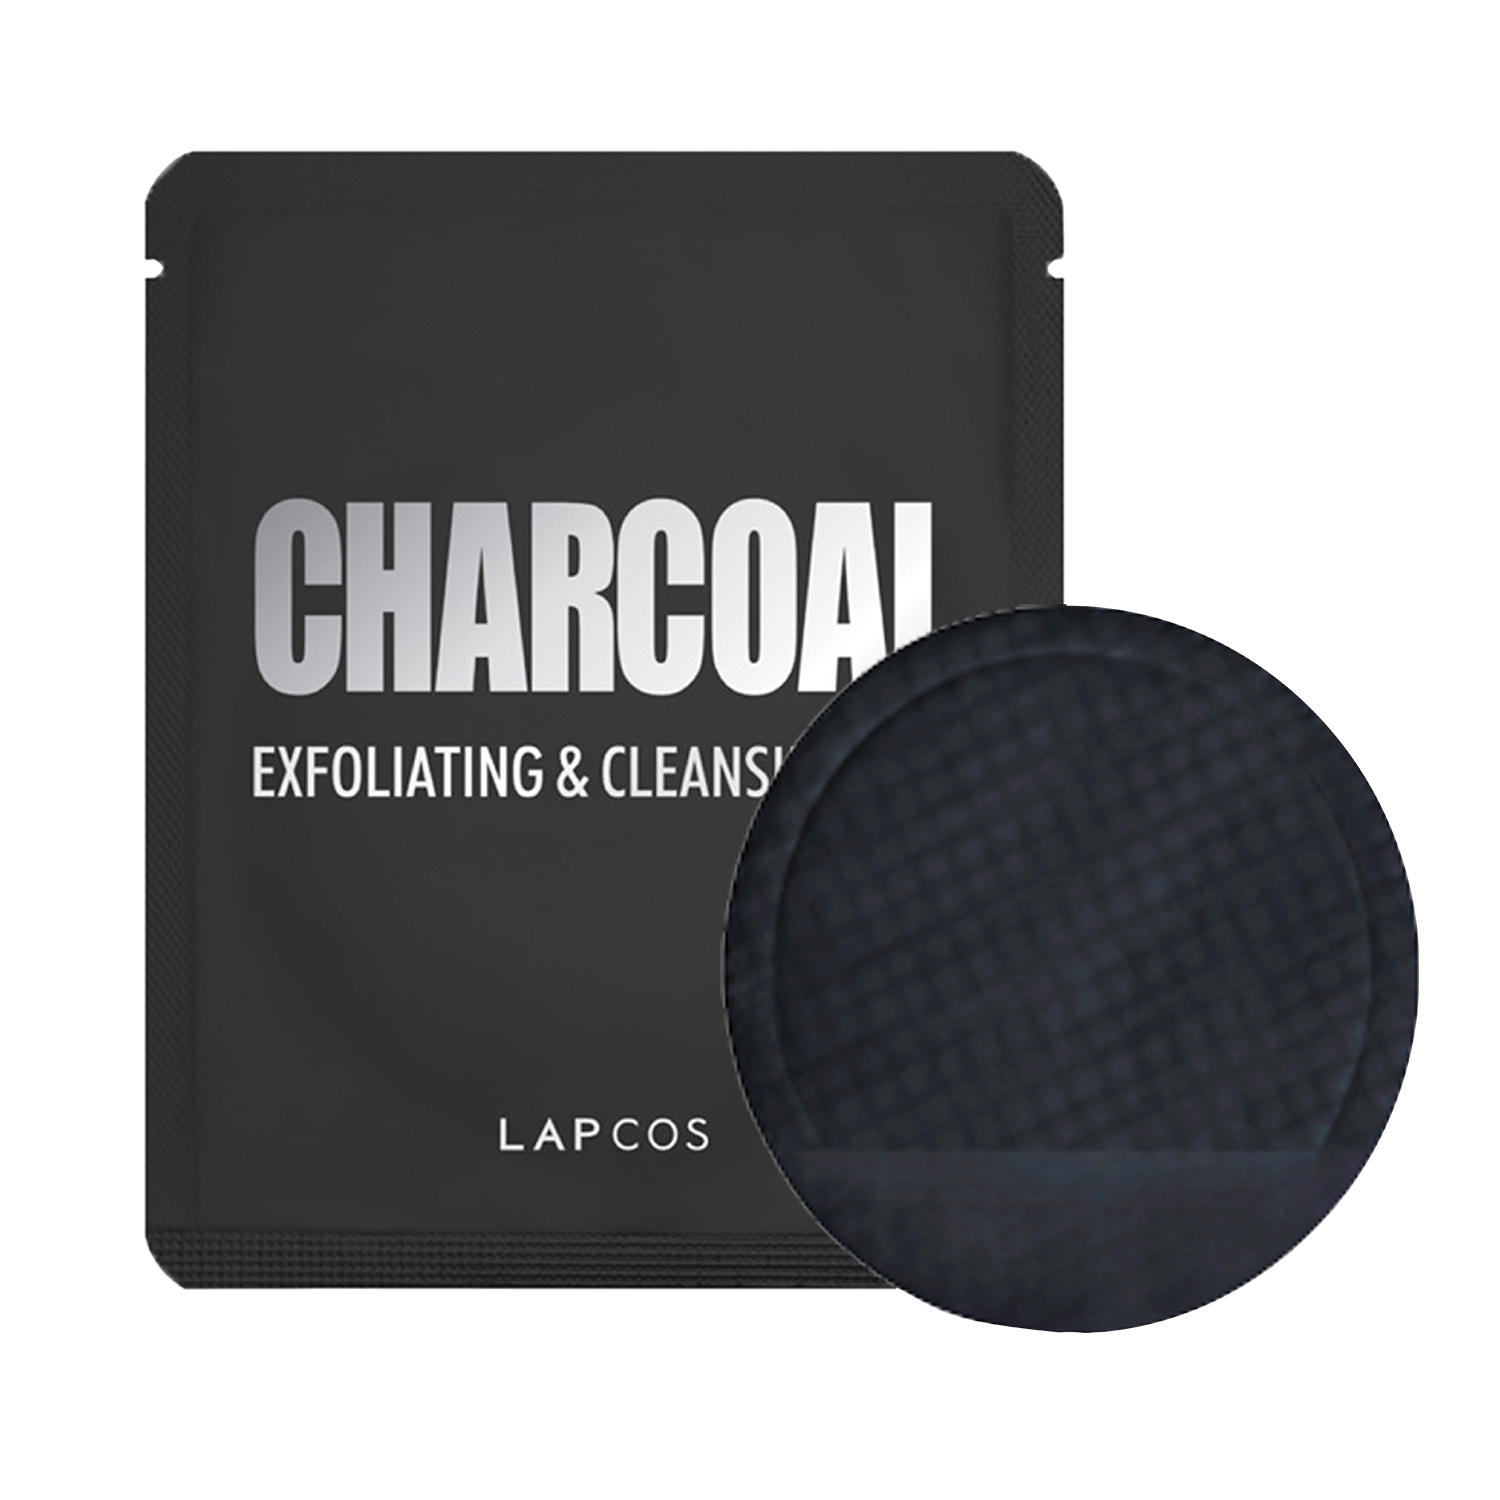 LAPCOS Charcoal exfoliating and cleansing pad